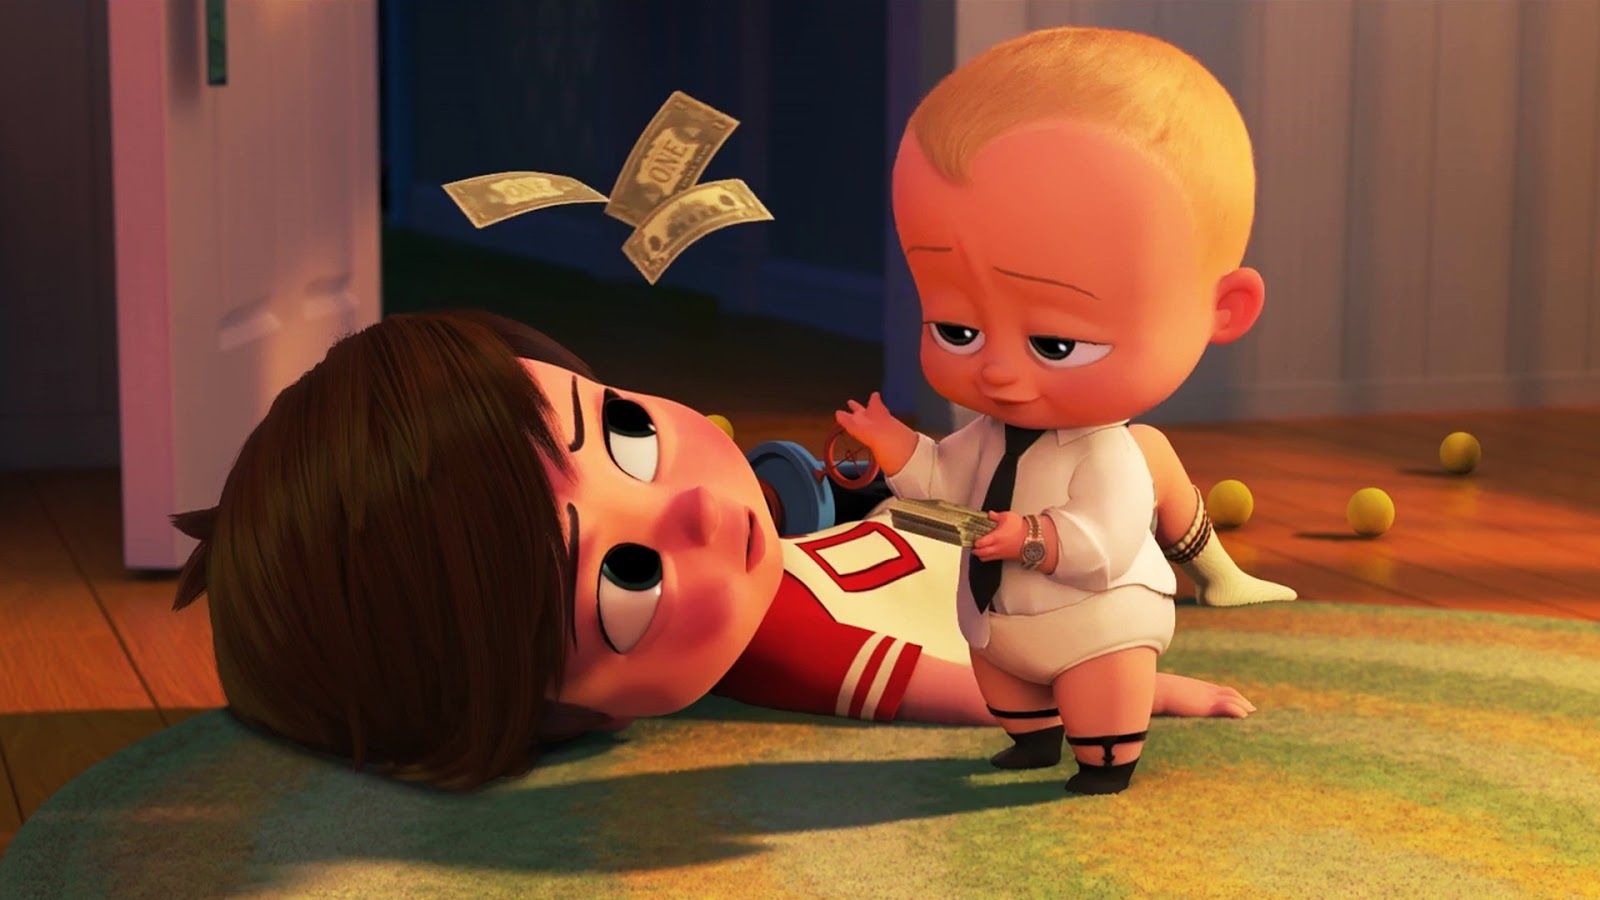 Kurland On Film: Dreamwork's “The Boss Baby” Is The Nightmare That Should Have Never Been Conceived